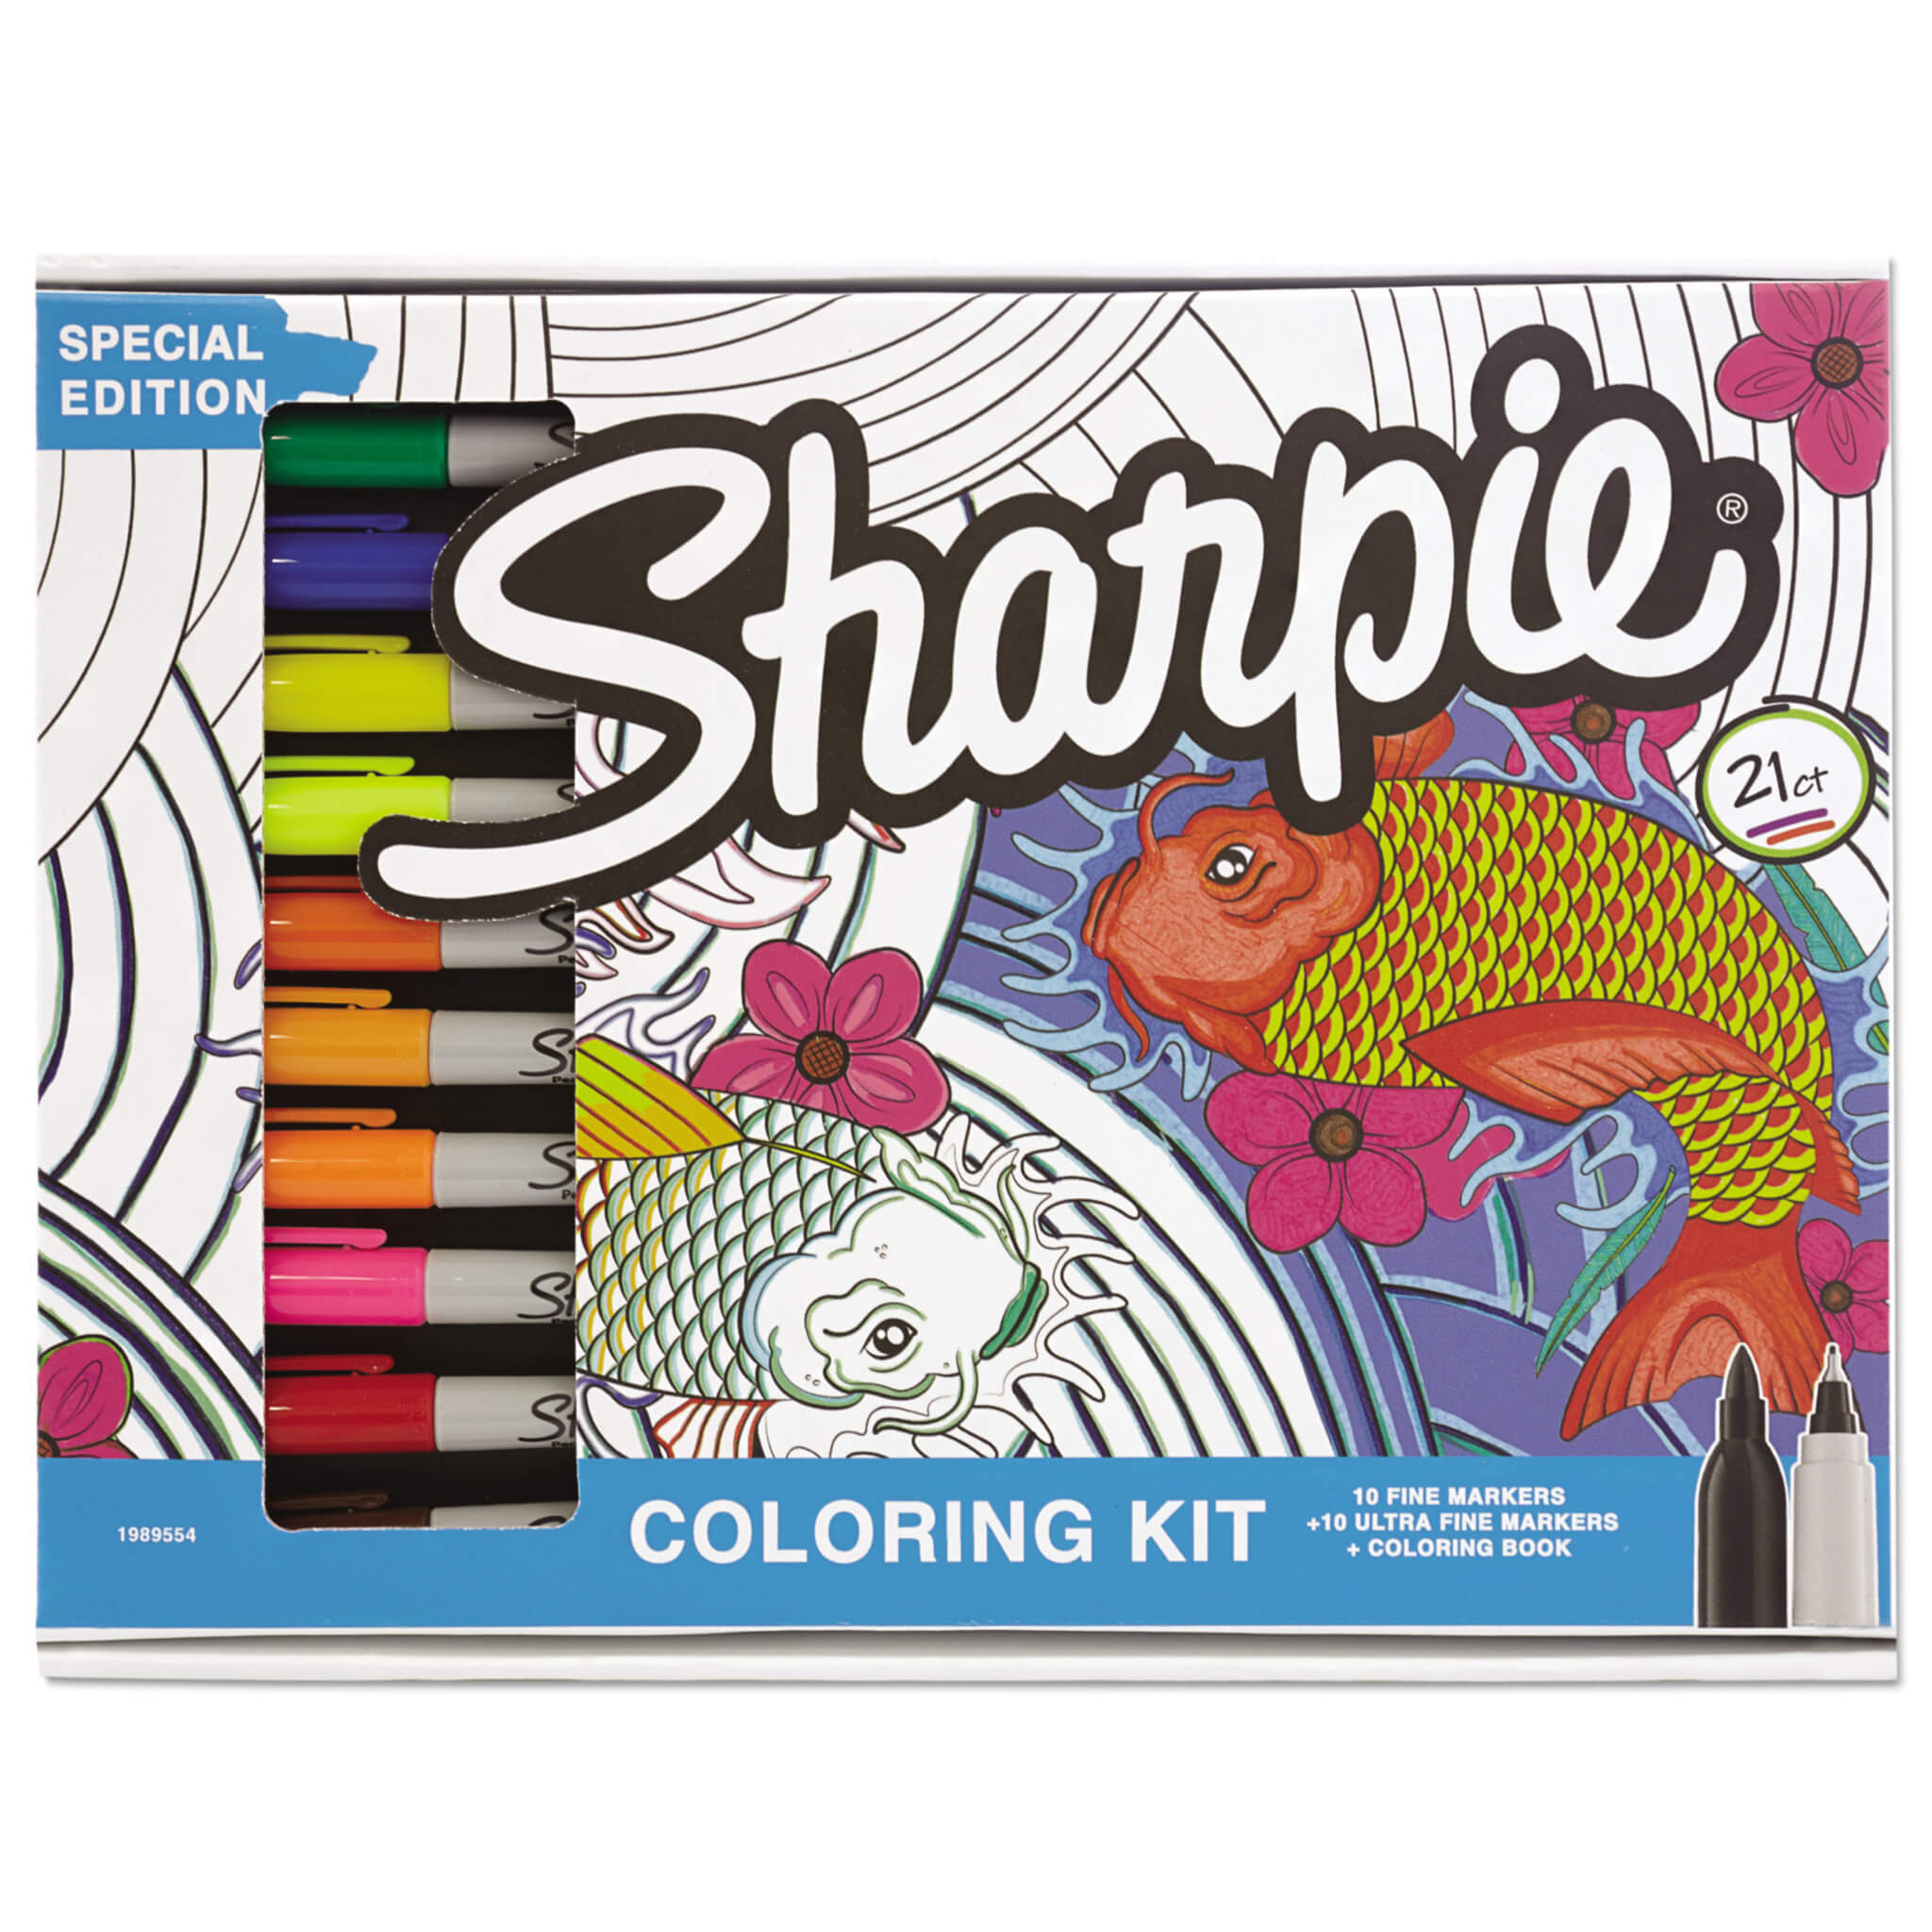 Sharpie Deep Sea Color Collection Coloring Kit ONLY $16.18 (Reg $42.30)